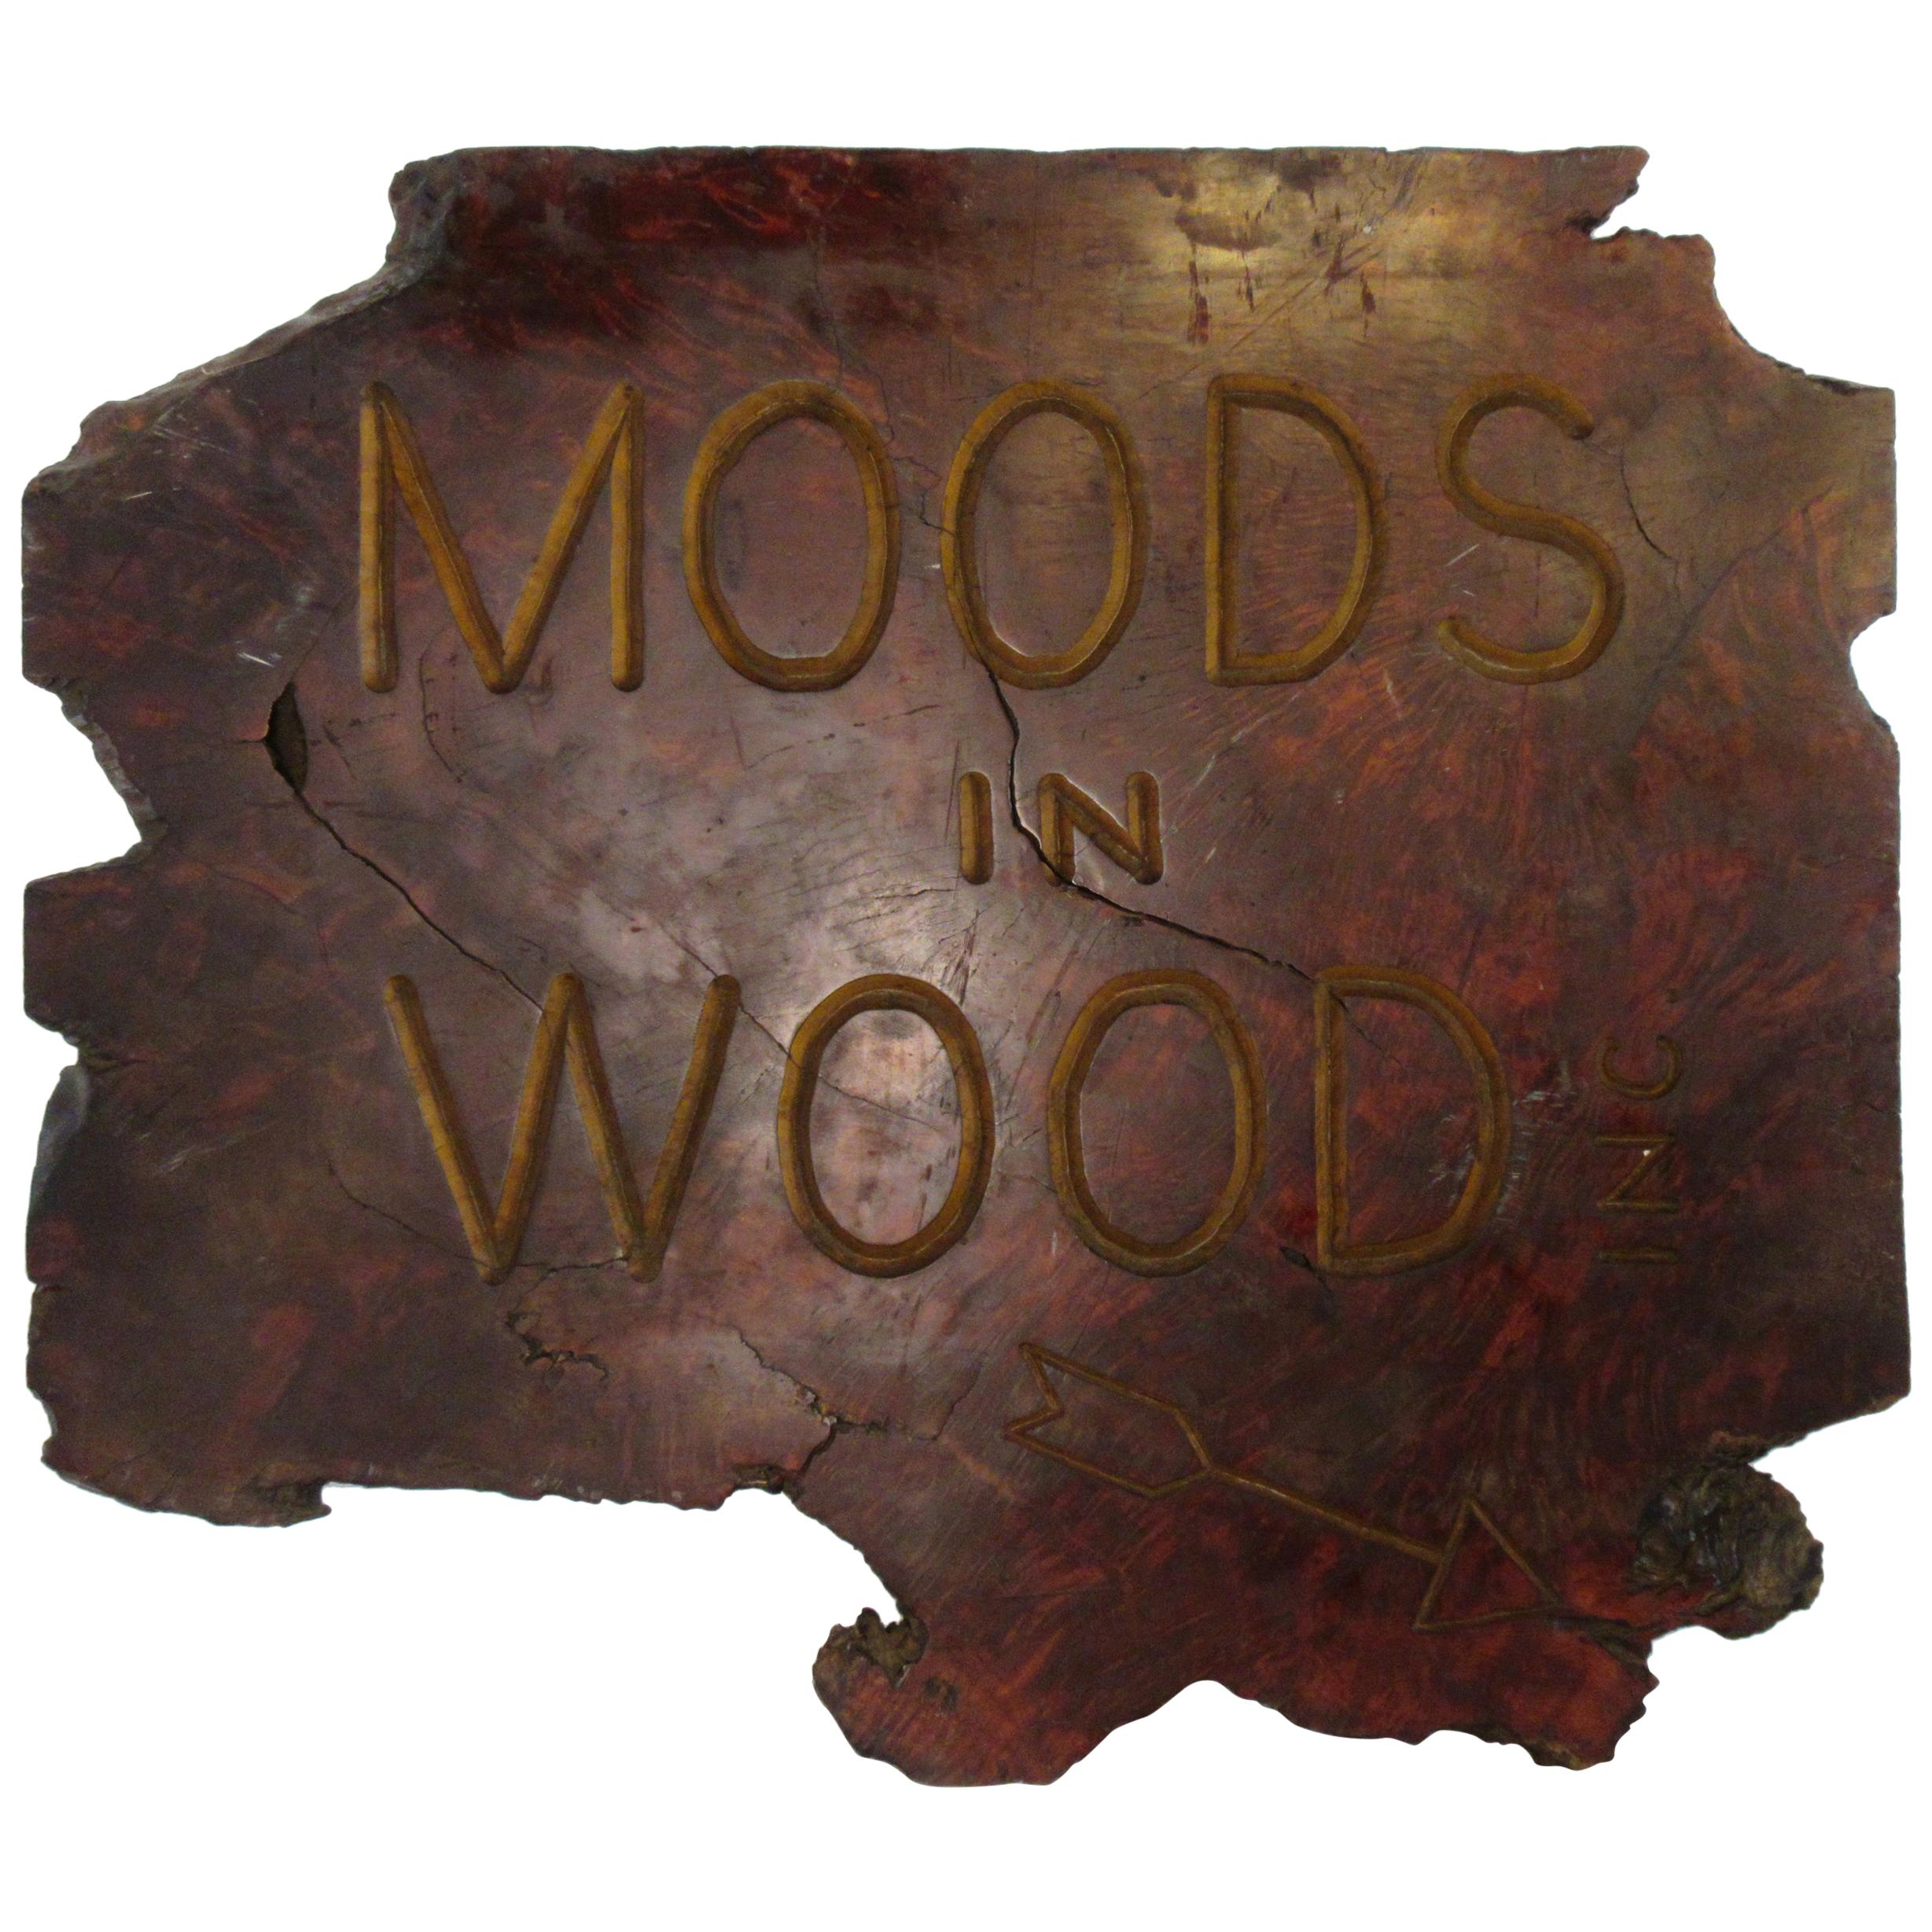 1970s Moods In Wood Sign